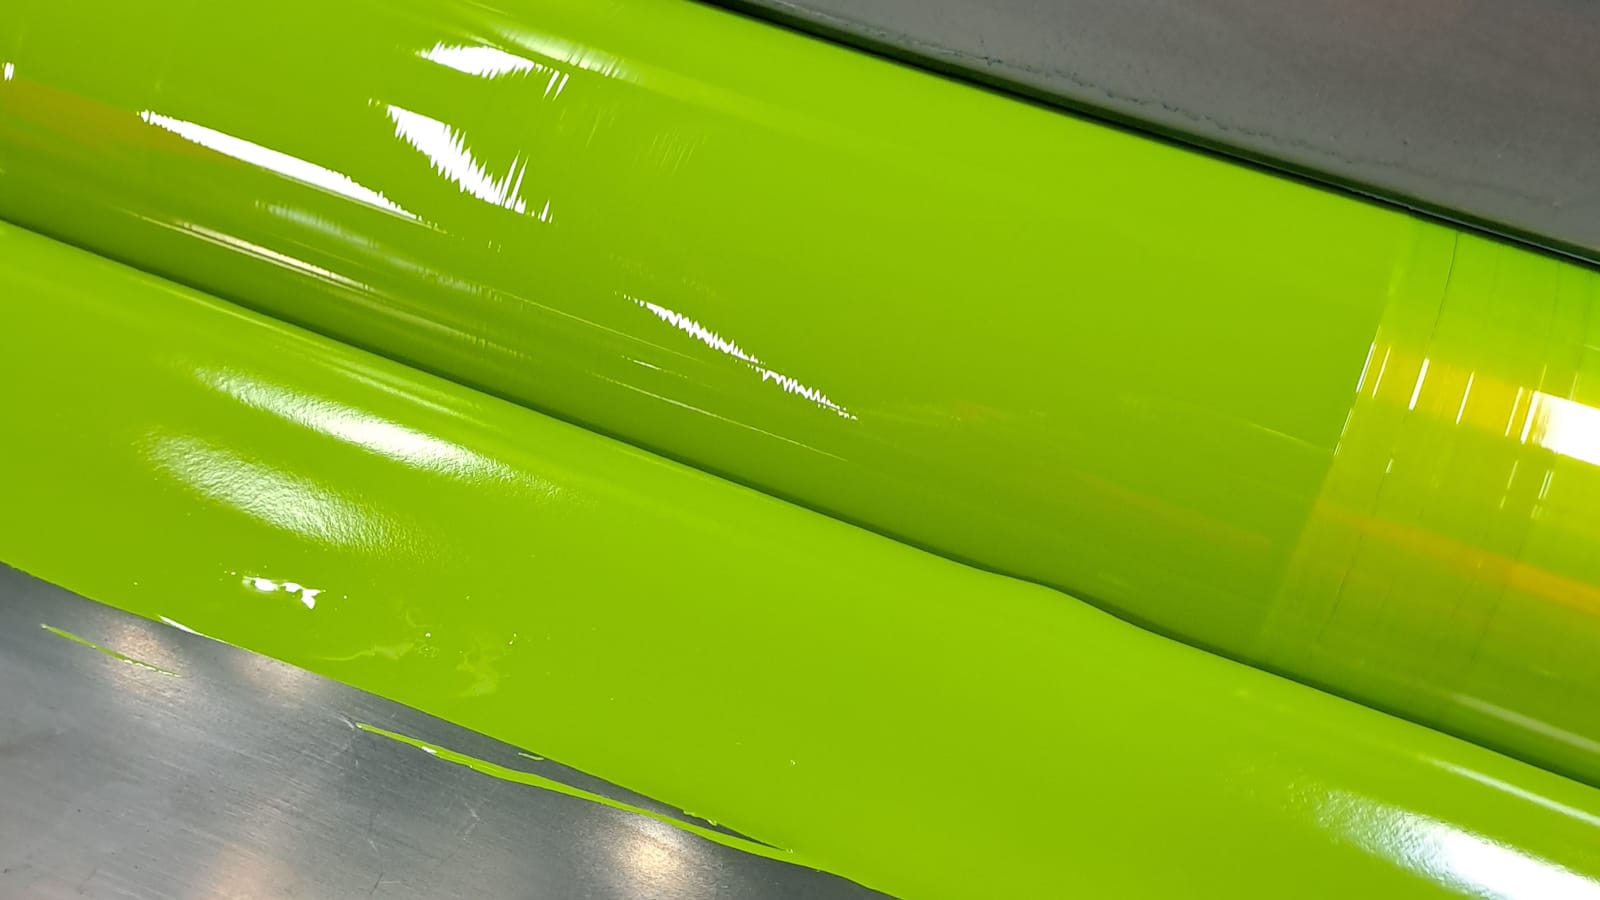 Two rollers with a bright yellow-green ink on them.